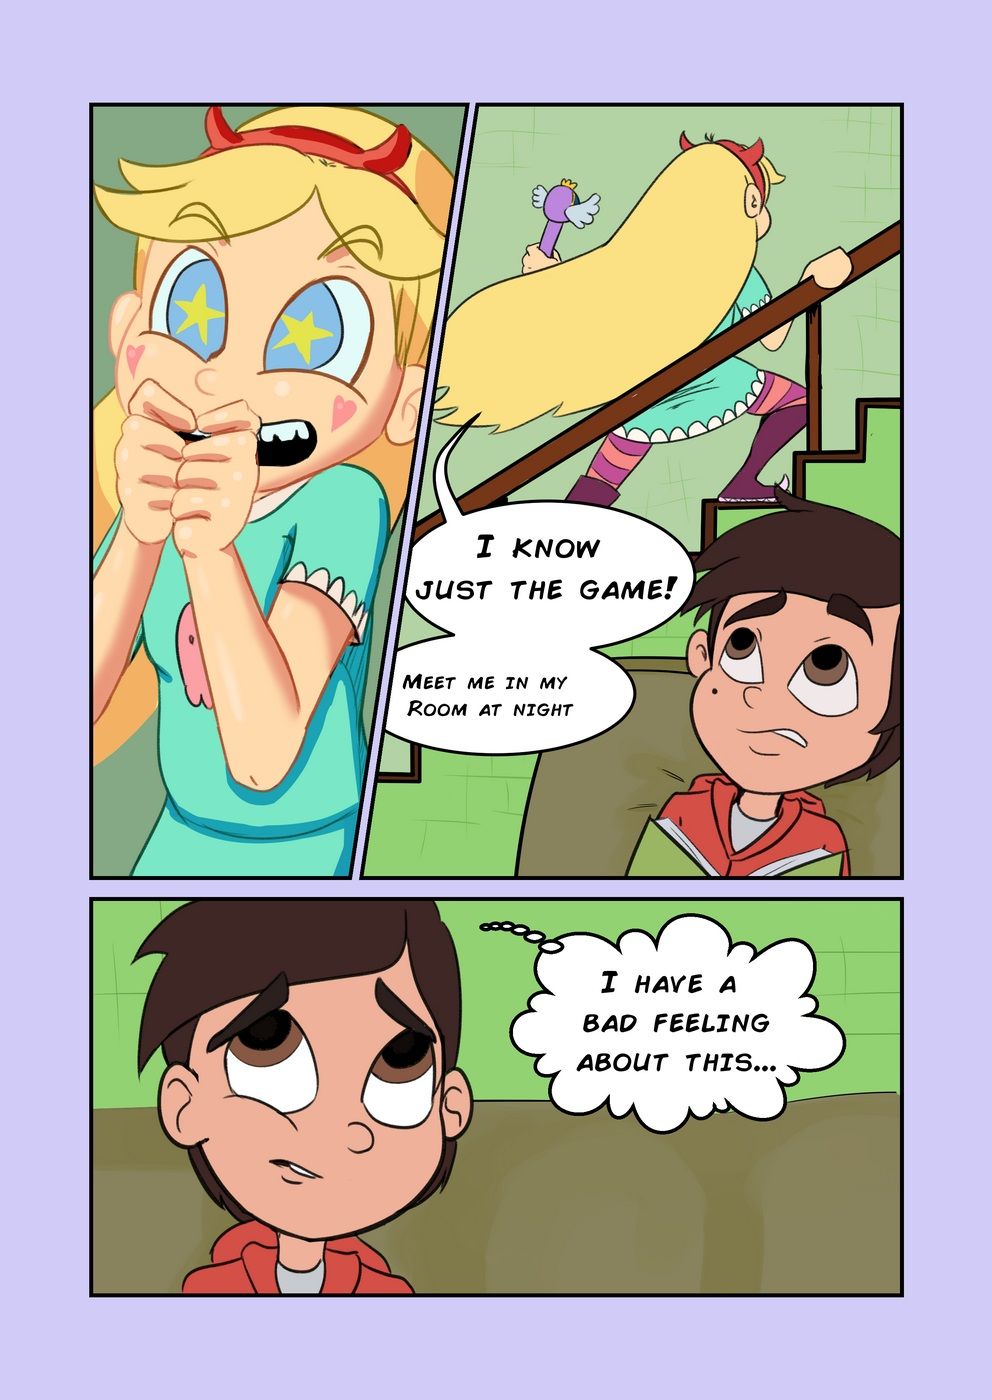 [Honeyshot] Star Vs The Forces Of Evil - Stars Board Game page 2